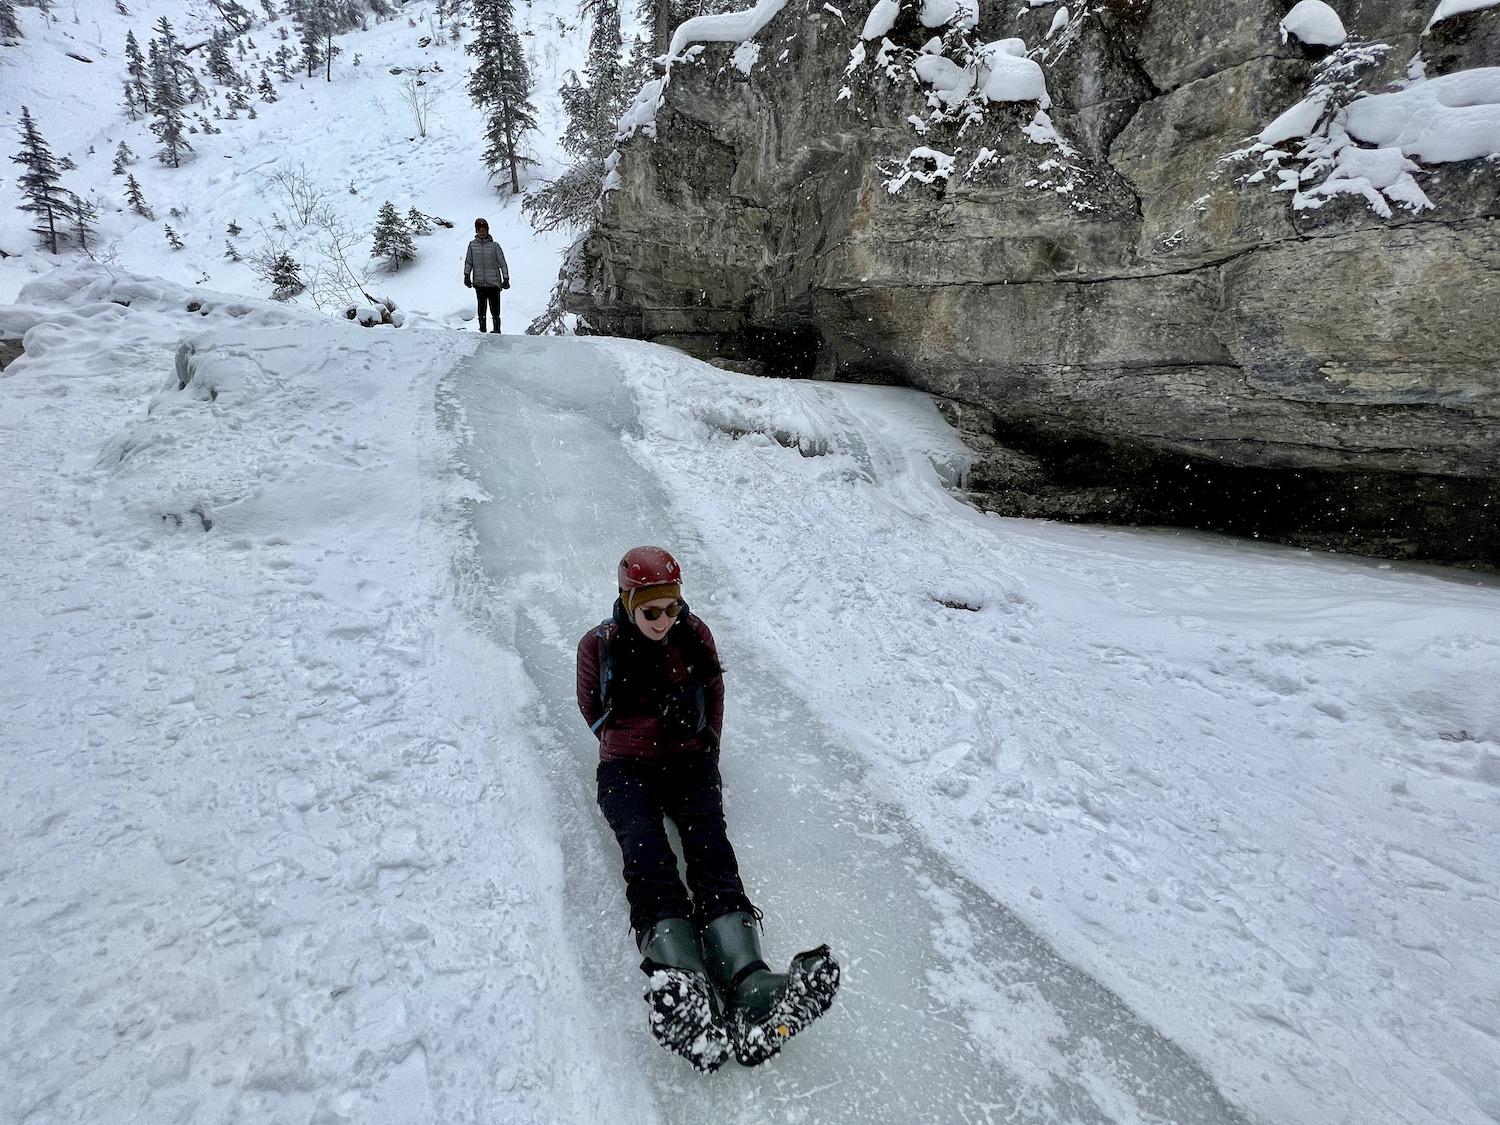 Maligne Canyon is constantly changing in winter, but on our visit there was an ice slide.